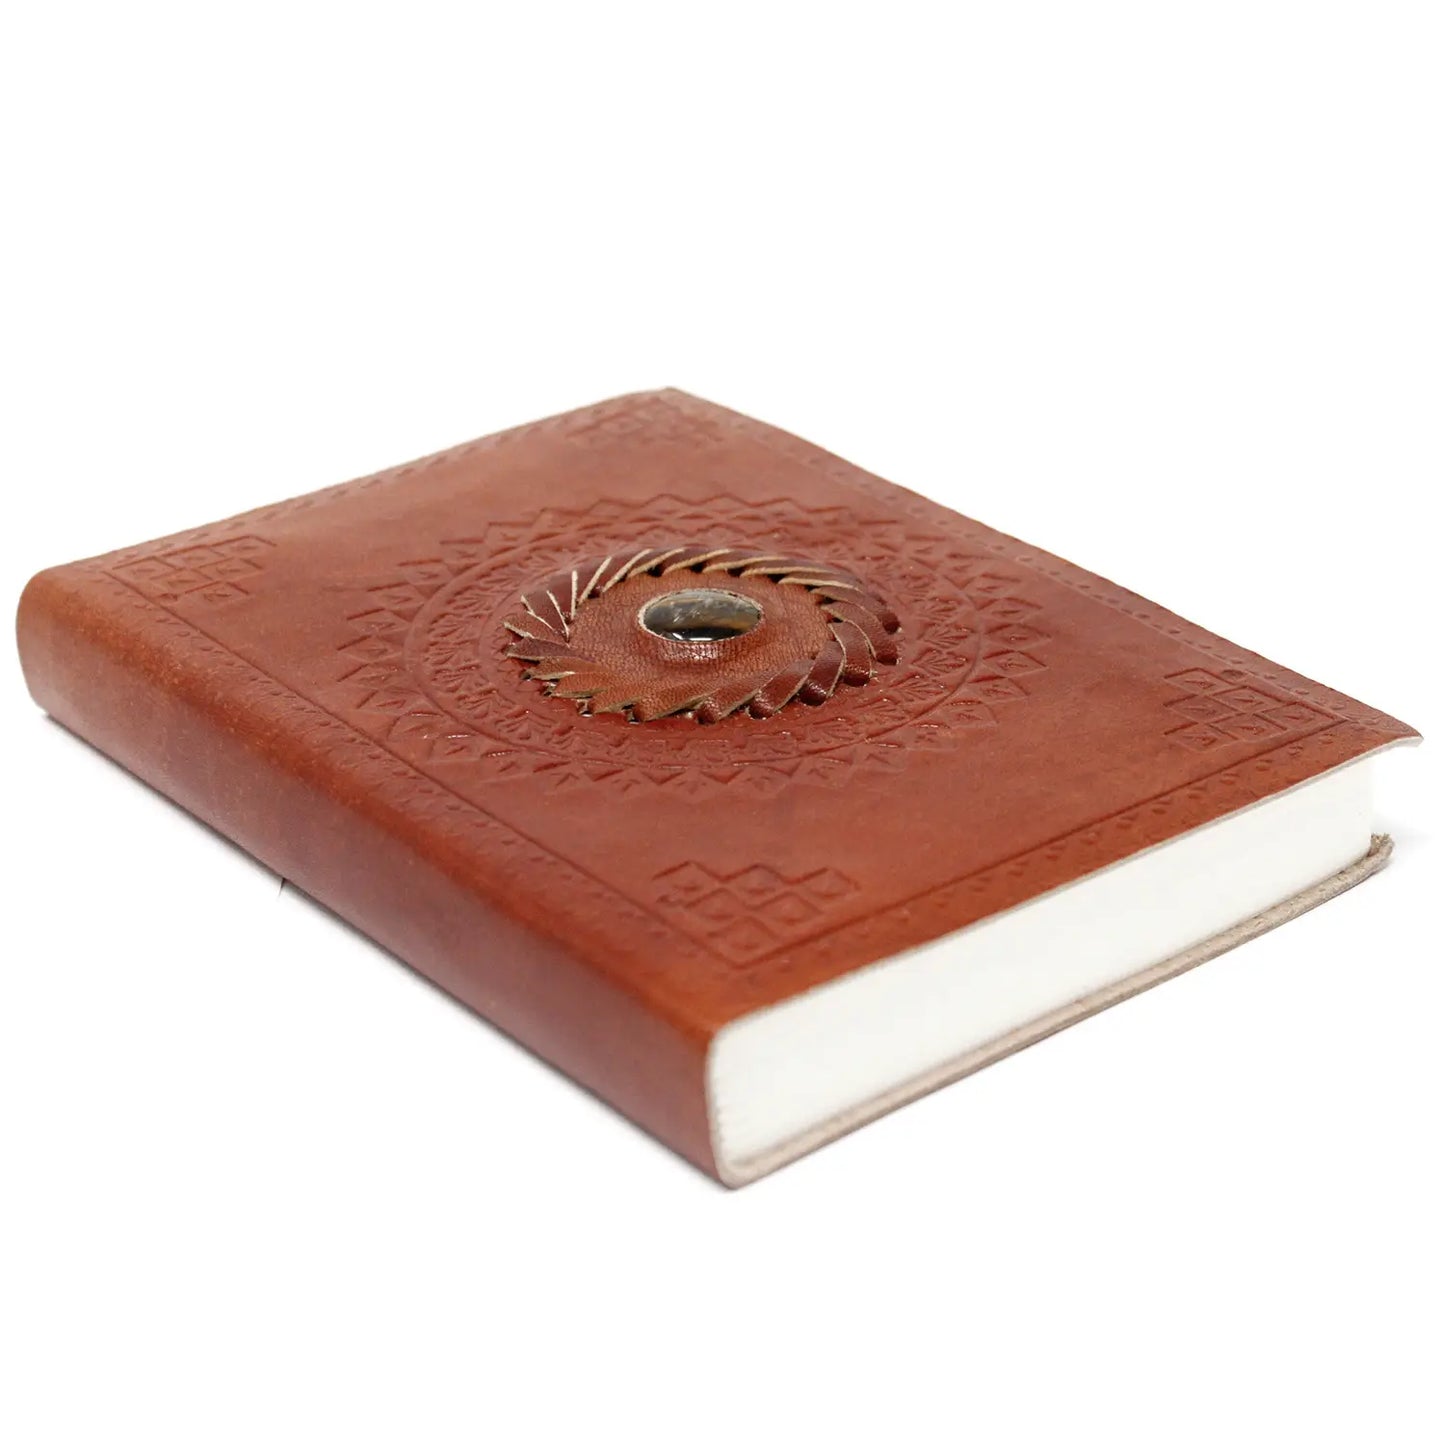 Leather Tigereye Notebook (7x5") ancient wisdom faire